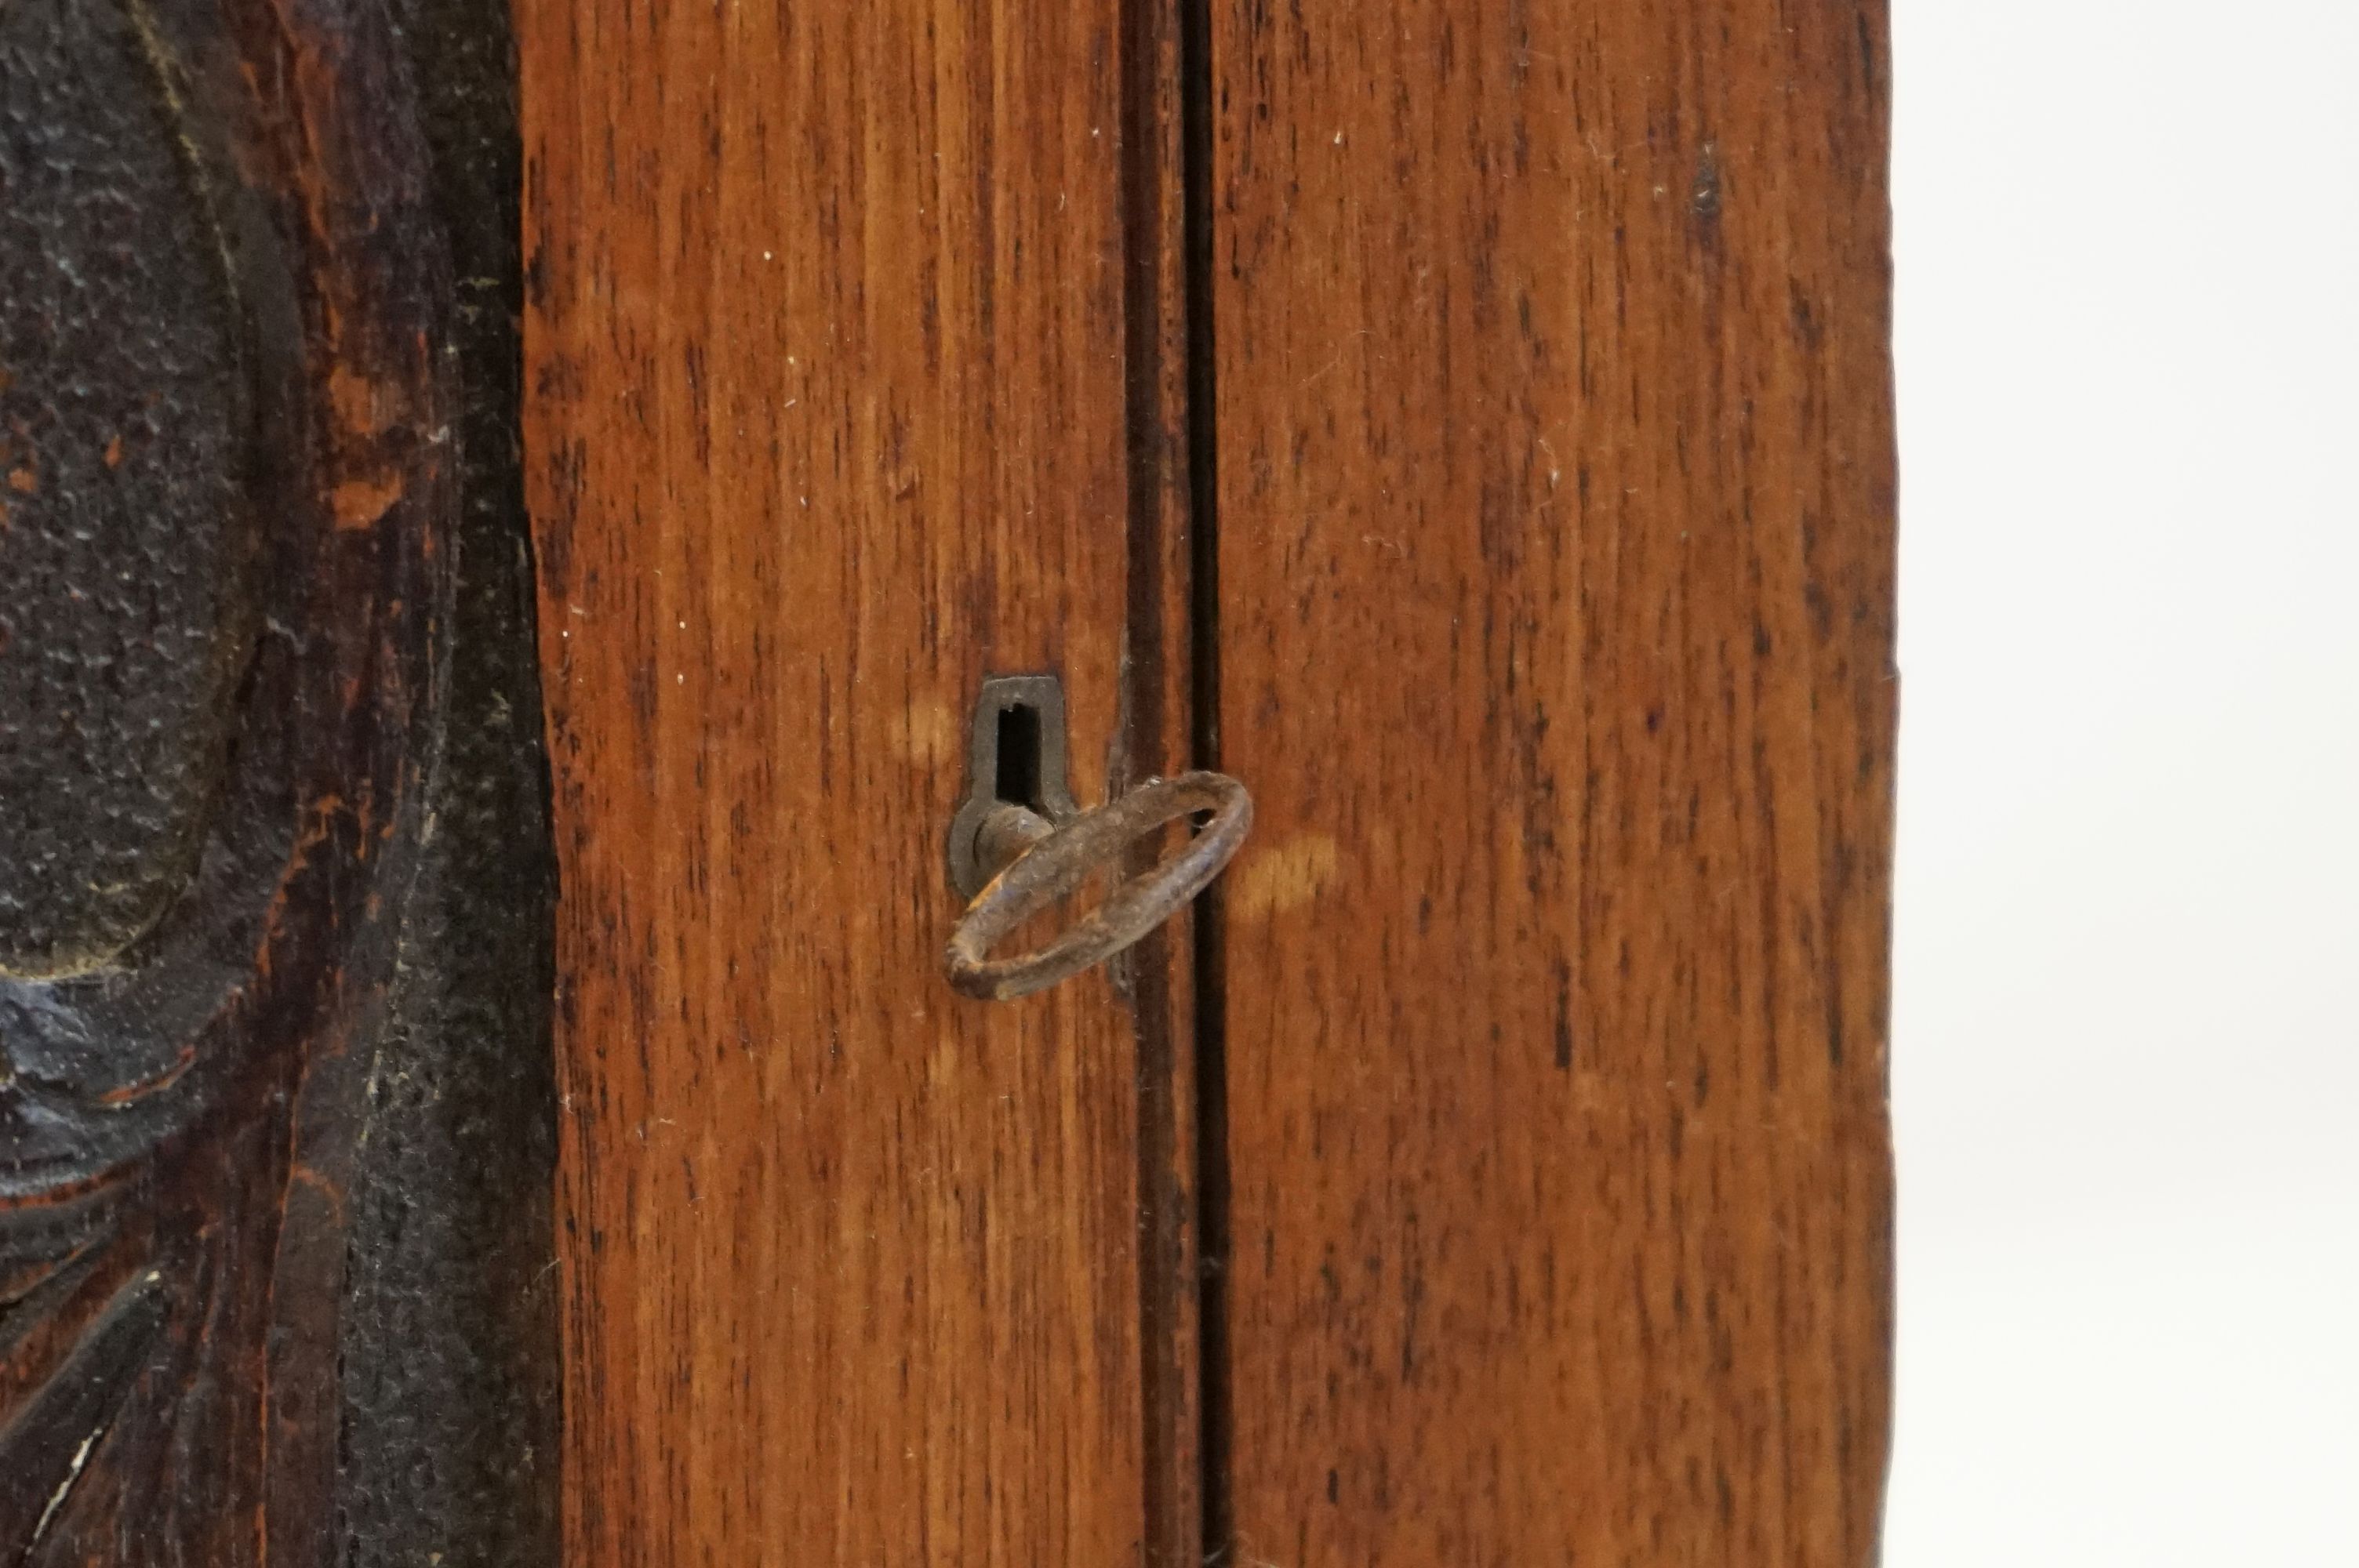 Late 19th / Early 20th century Small Oak Hanging Corner Cupboard, the single panel door carved - Image 6 of 7